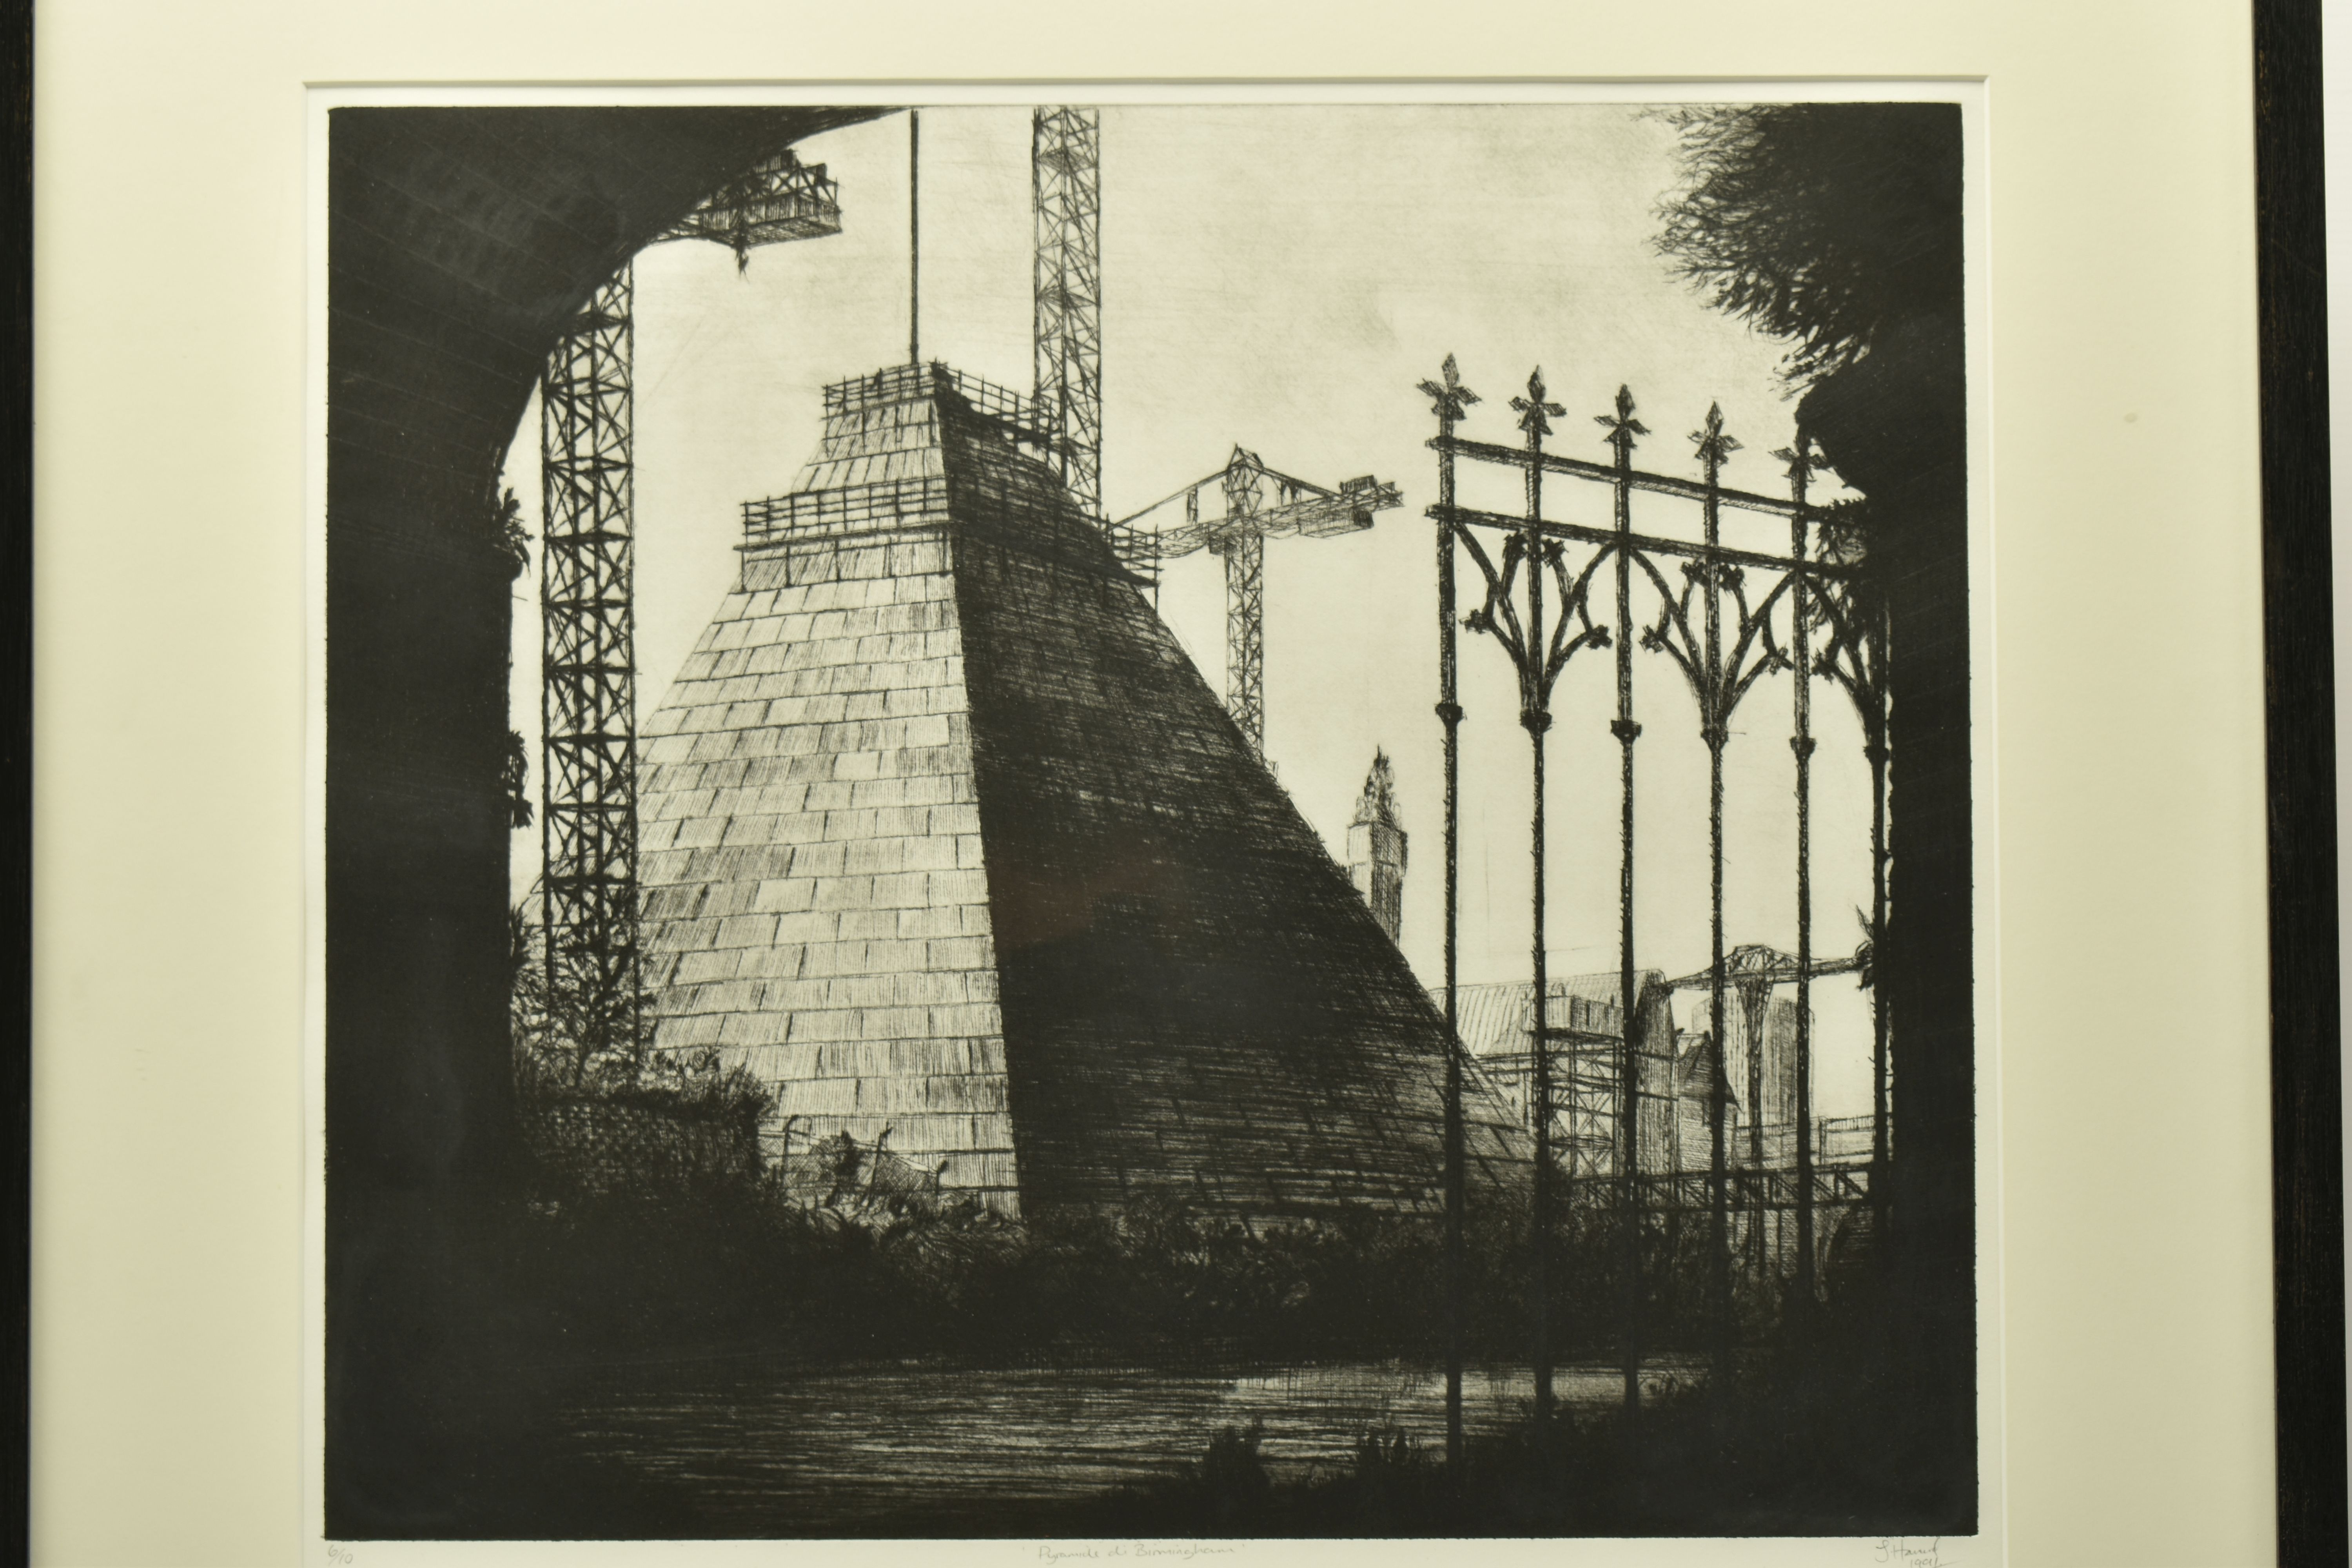 JOHN HOWARD (BRITISH 1958) 'PYRAMIDE DI BIRMINGHAM', a limited edition dry point etching depicting - Image 2 of 9